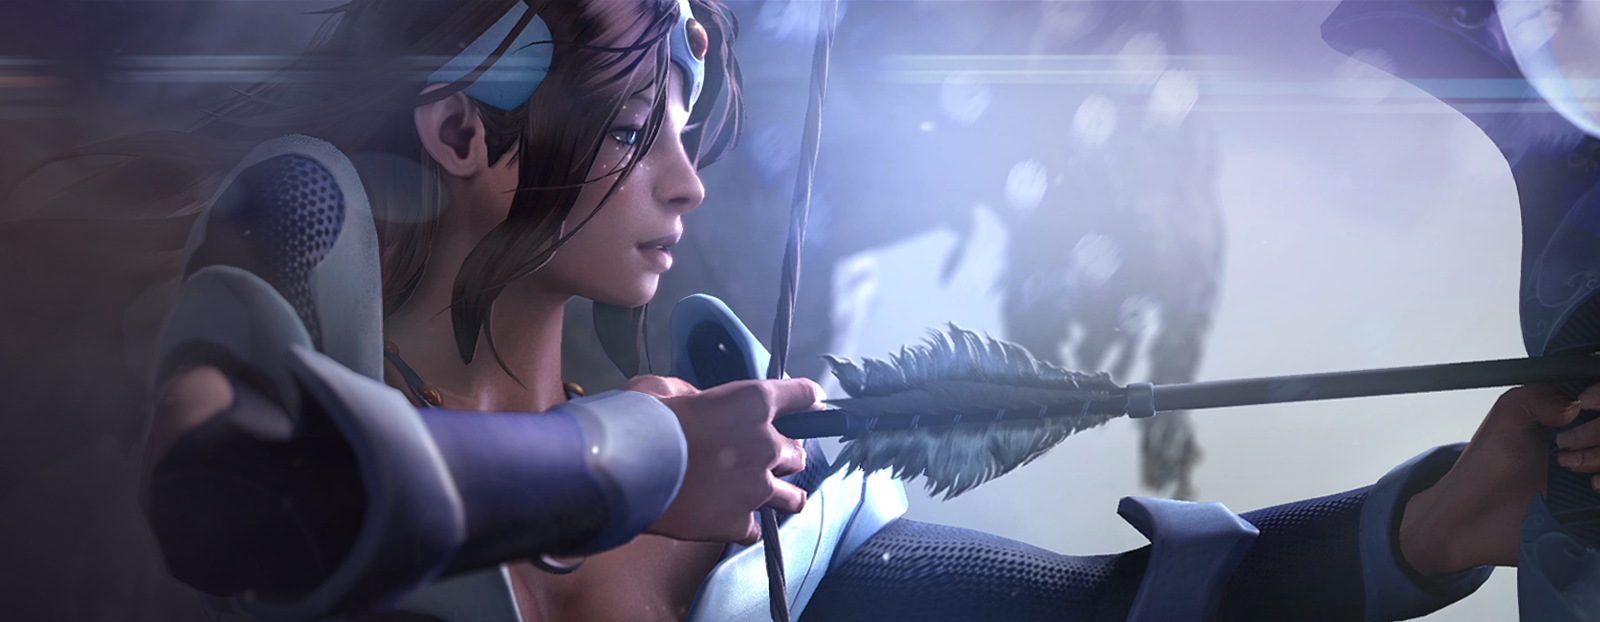 Mirana awesome background at the dota 2 reborn page